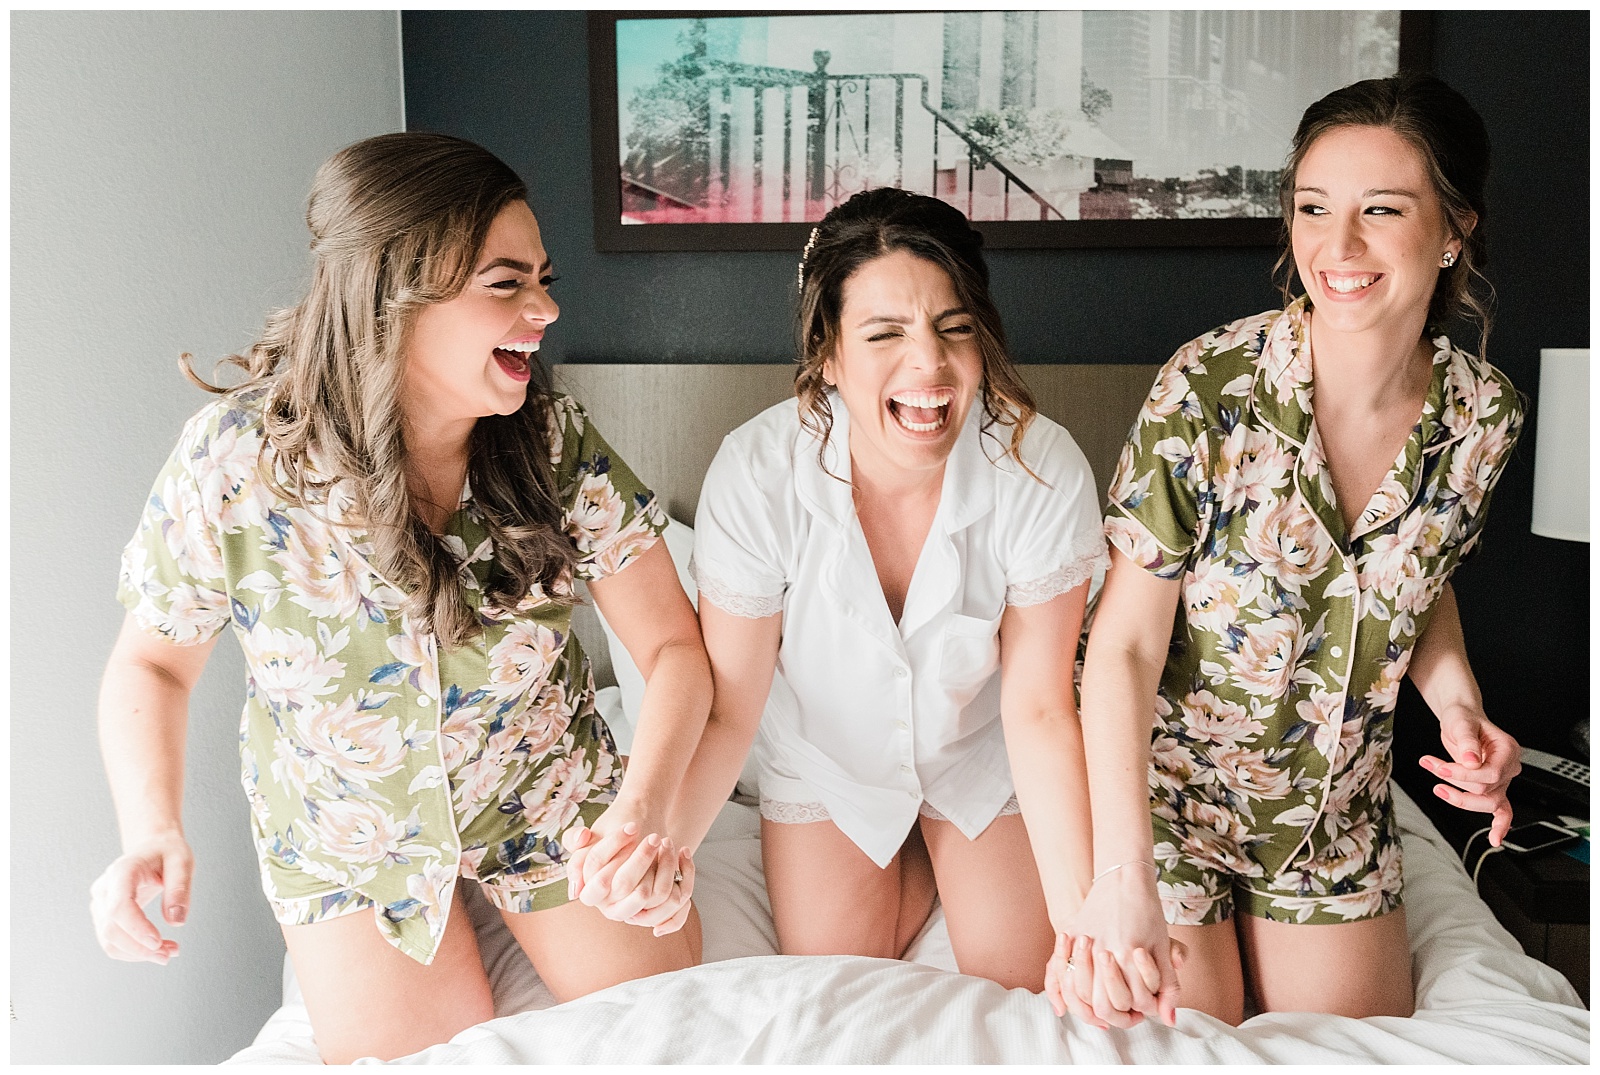 Bride and bridesmaids laughing, holding hands while wearing matching pajamas.